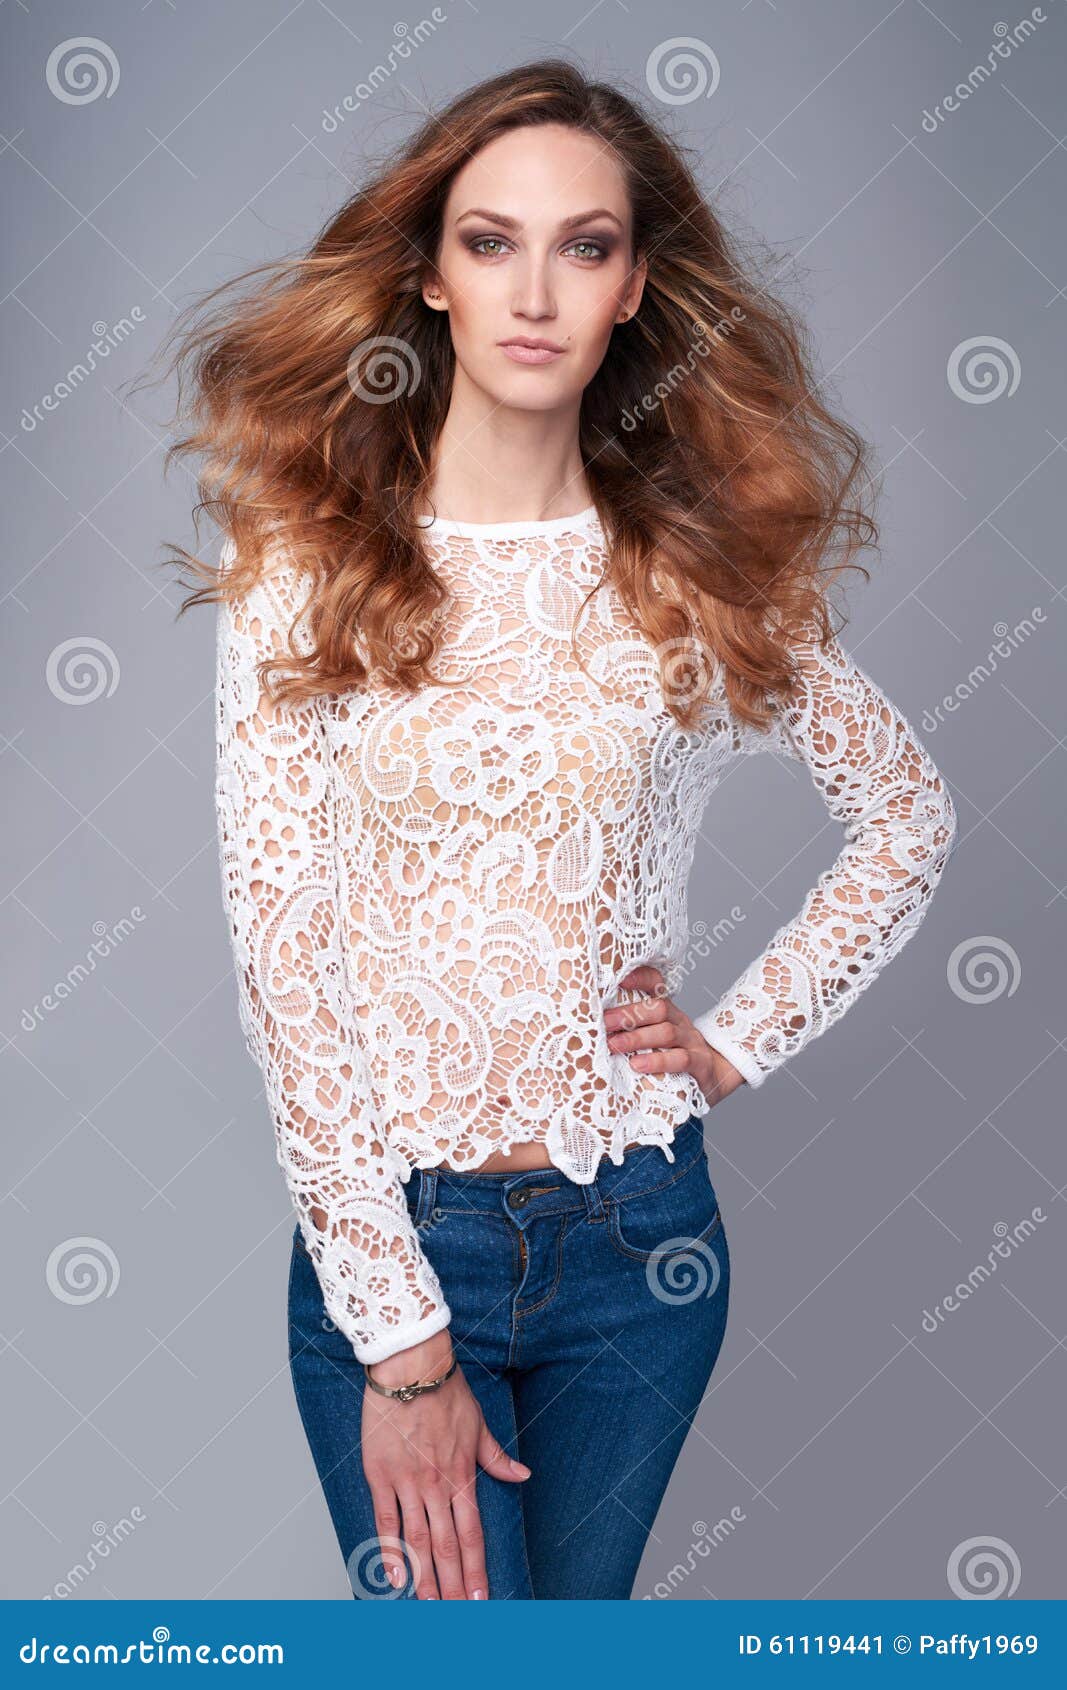 Half Length Portrait Of Fashion Model In Lace Top Stock Image - Image ...